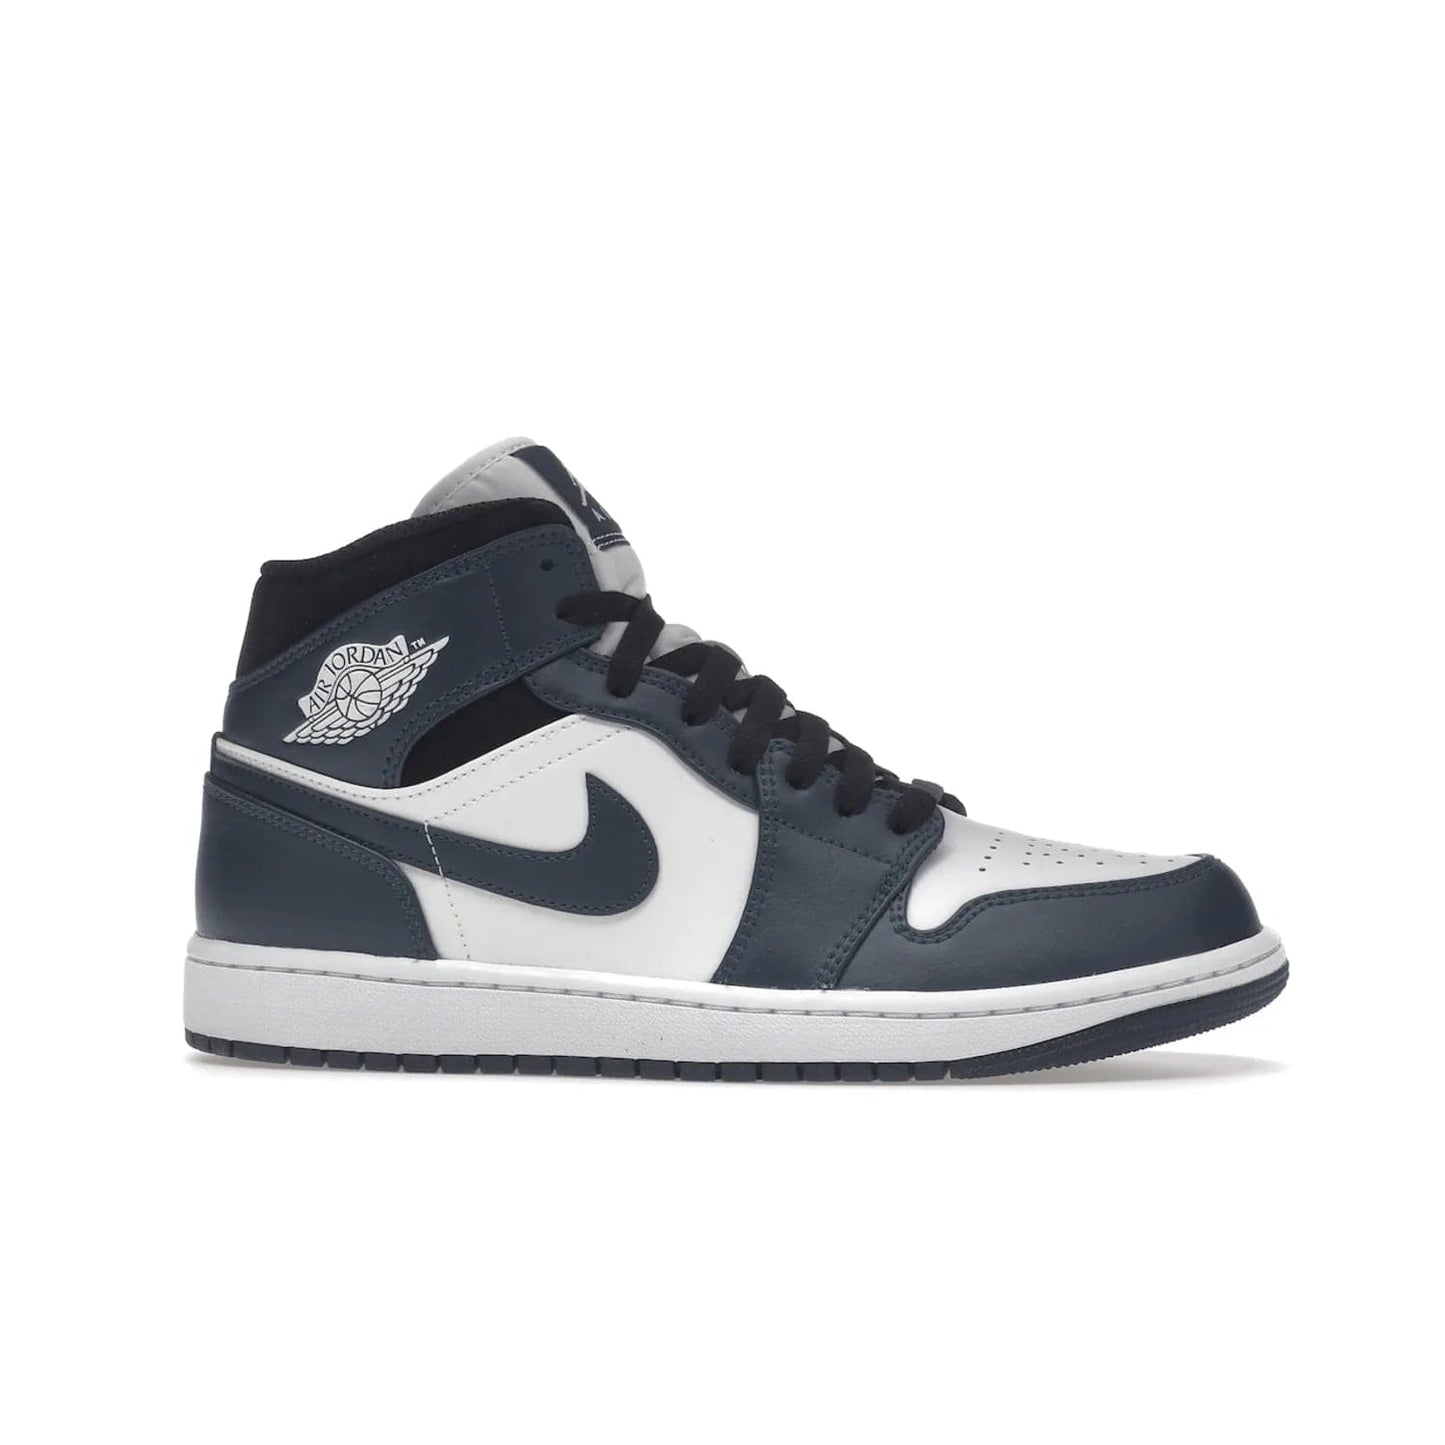 Jordan 1 Mid Armory Navy - Image 2 - Only at www.BallersClubKickz.com - The Jordan 1 Mid Armory Navy: classic basketball sneaker with soft white leather upper, deep navy blue overlays, and black leather ankle detailing. Iconic style with Jordan Wings logo and Jumpman label.